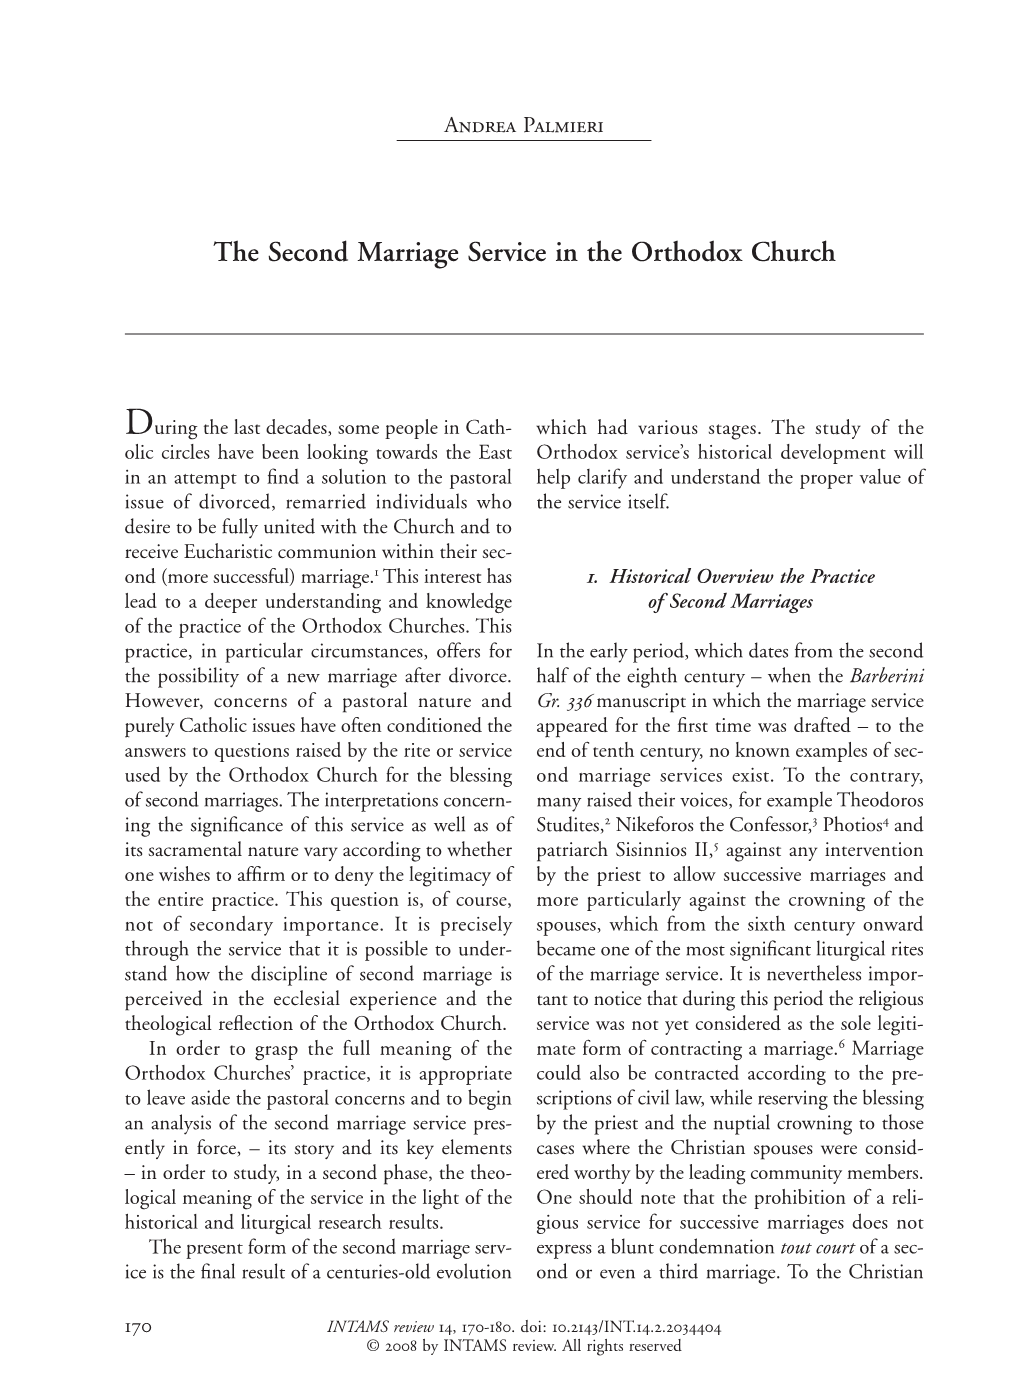 The Second Marriage Service in the Orthodox Church